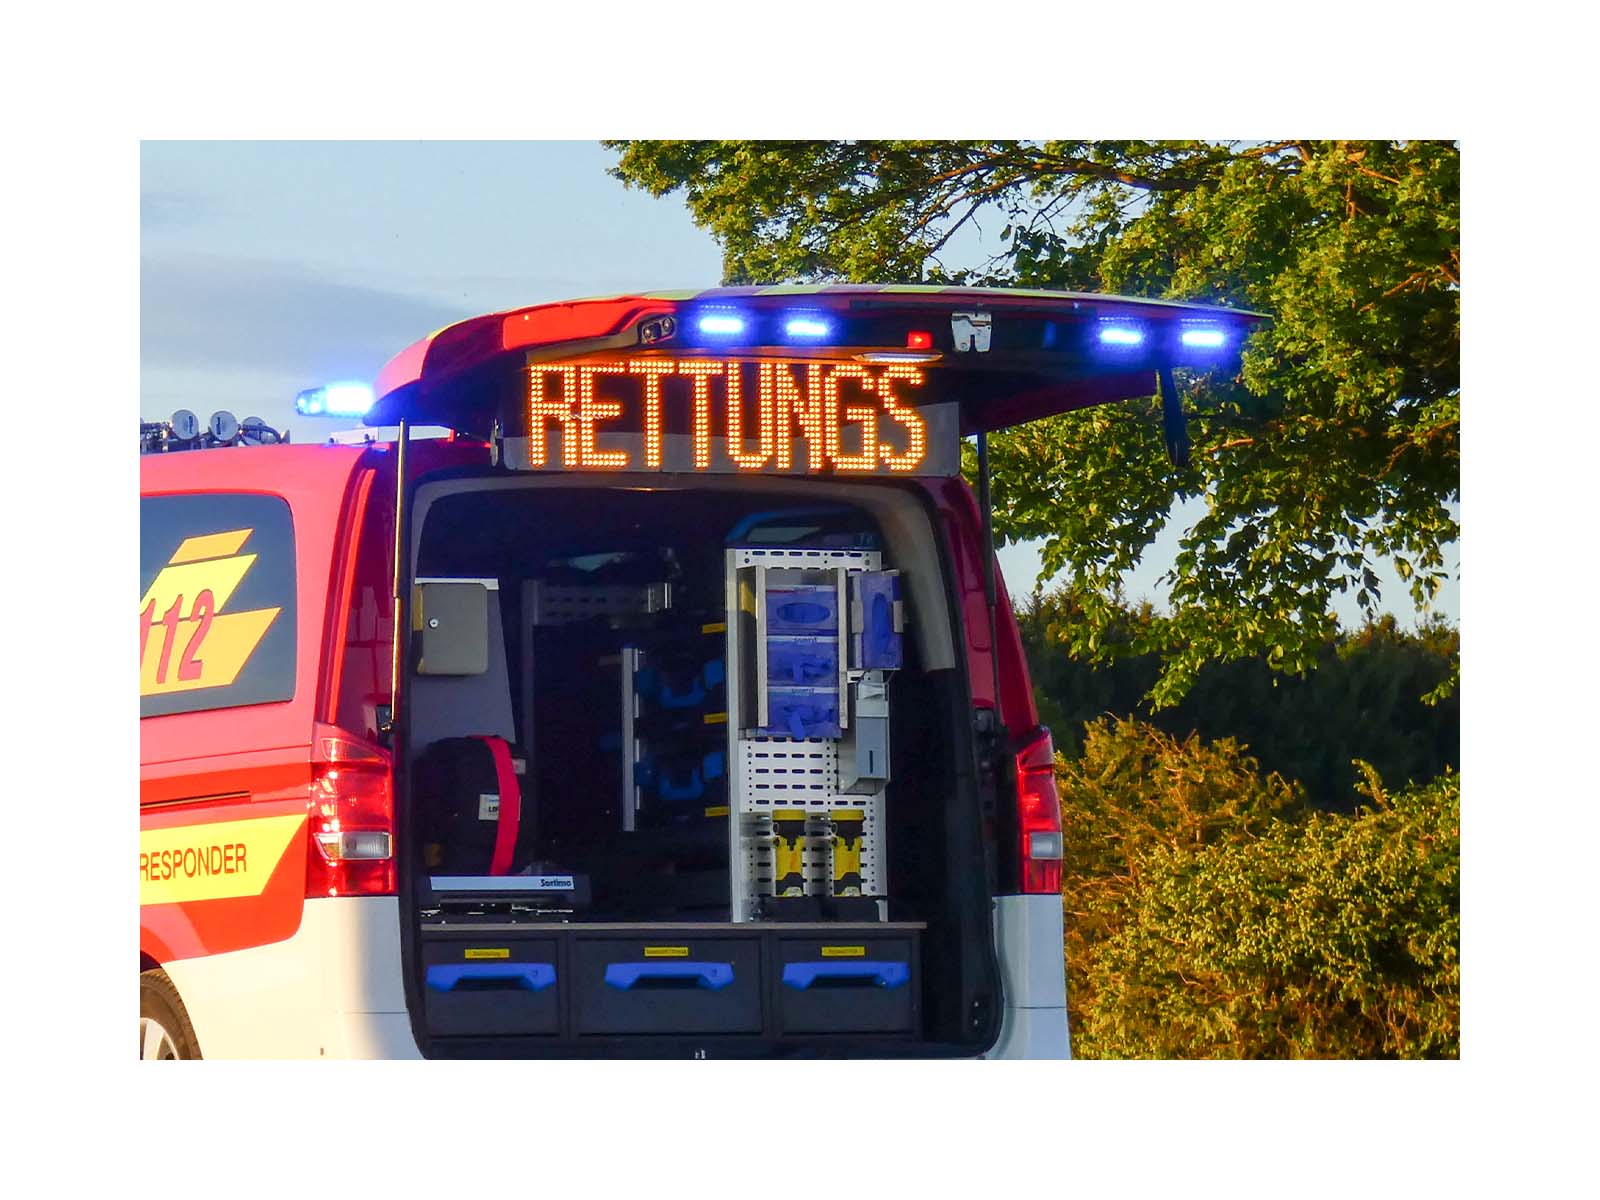 Message Display Sign in Back of Responder Vehicle Showing the Message Rettungs